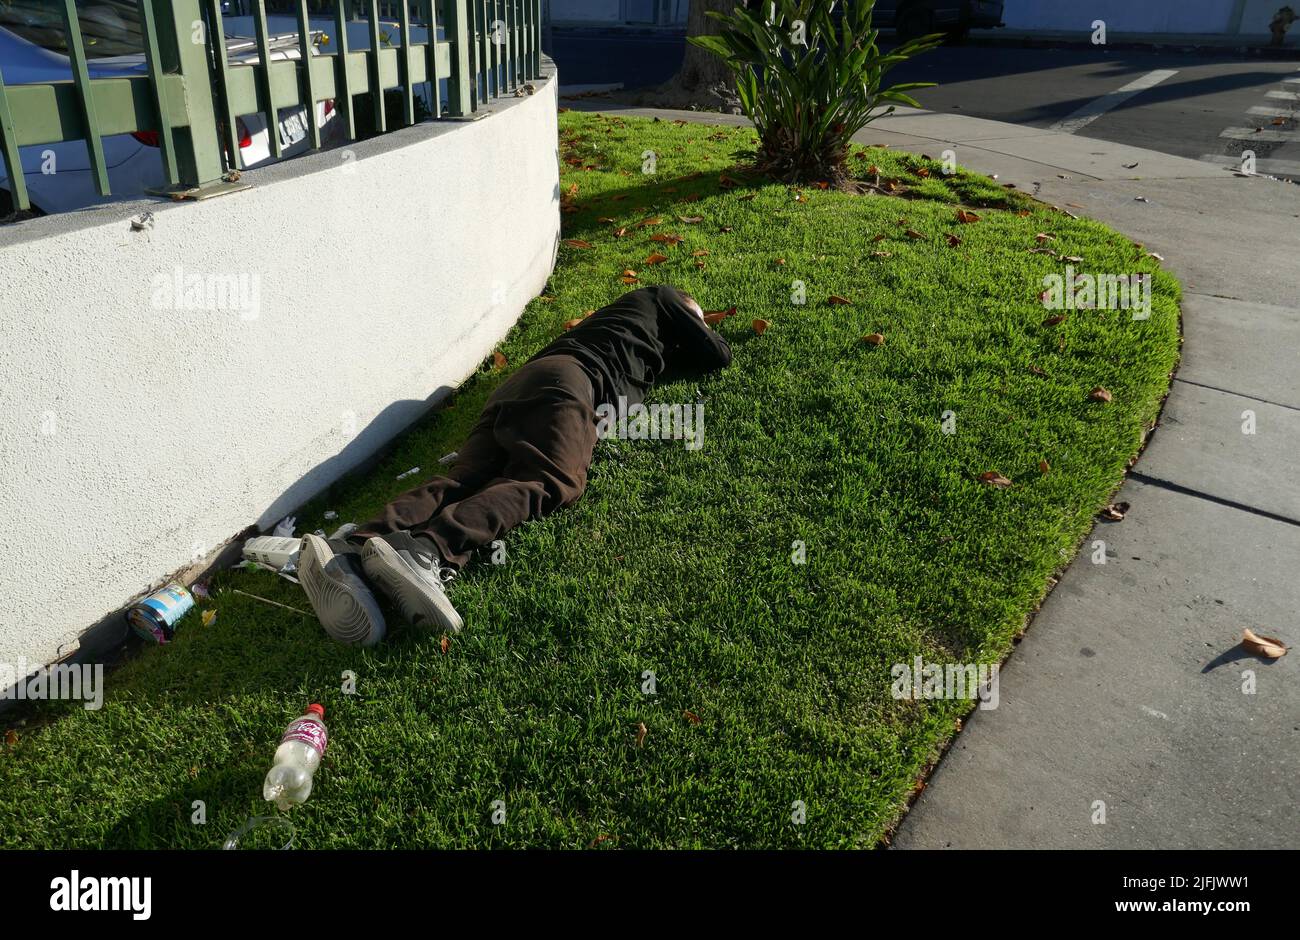 Los Angeles, California, USA 19th June 2022 A general view of atmosphere of Homeless man sleeping on street on June 19, 2022 in Los Angeles, California, USA. Photo by Barry King/Alamy Stock Photo Stock Photo